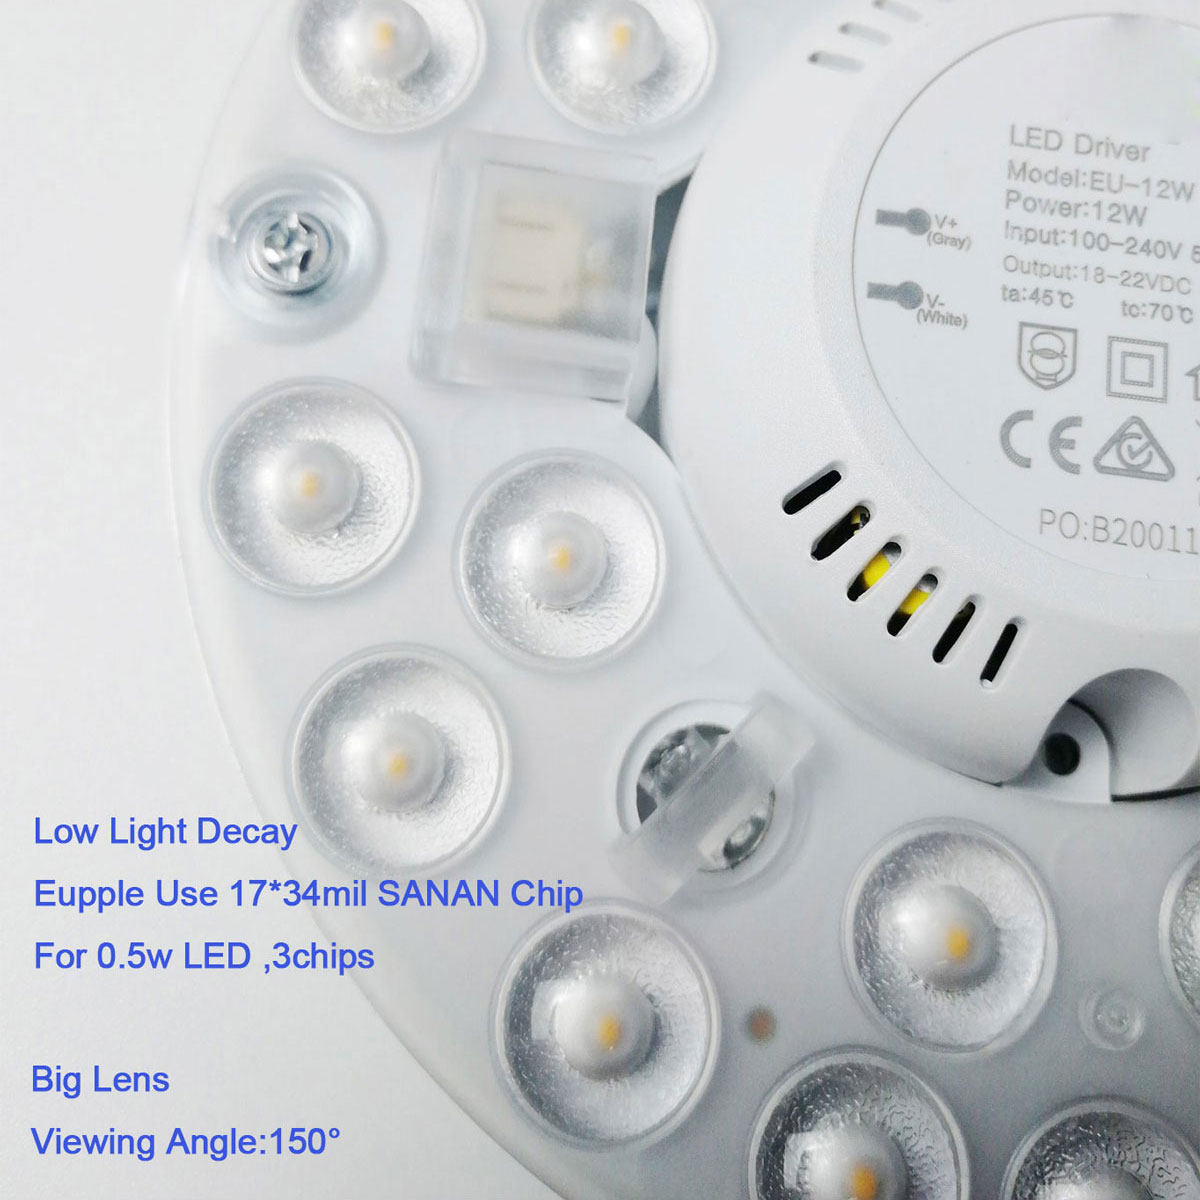 120lm/w 12w 18w 24w LED lens Module For Ceiling Light, Replace Dark Light AC 2835 SMD Round LED Module With Lens